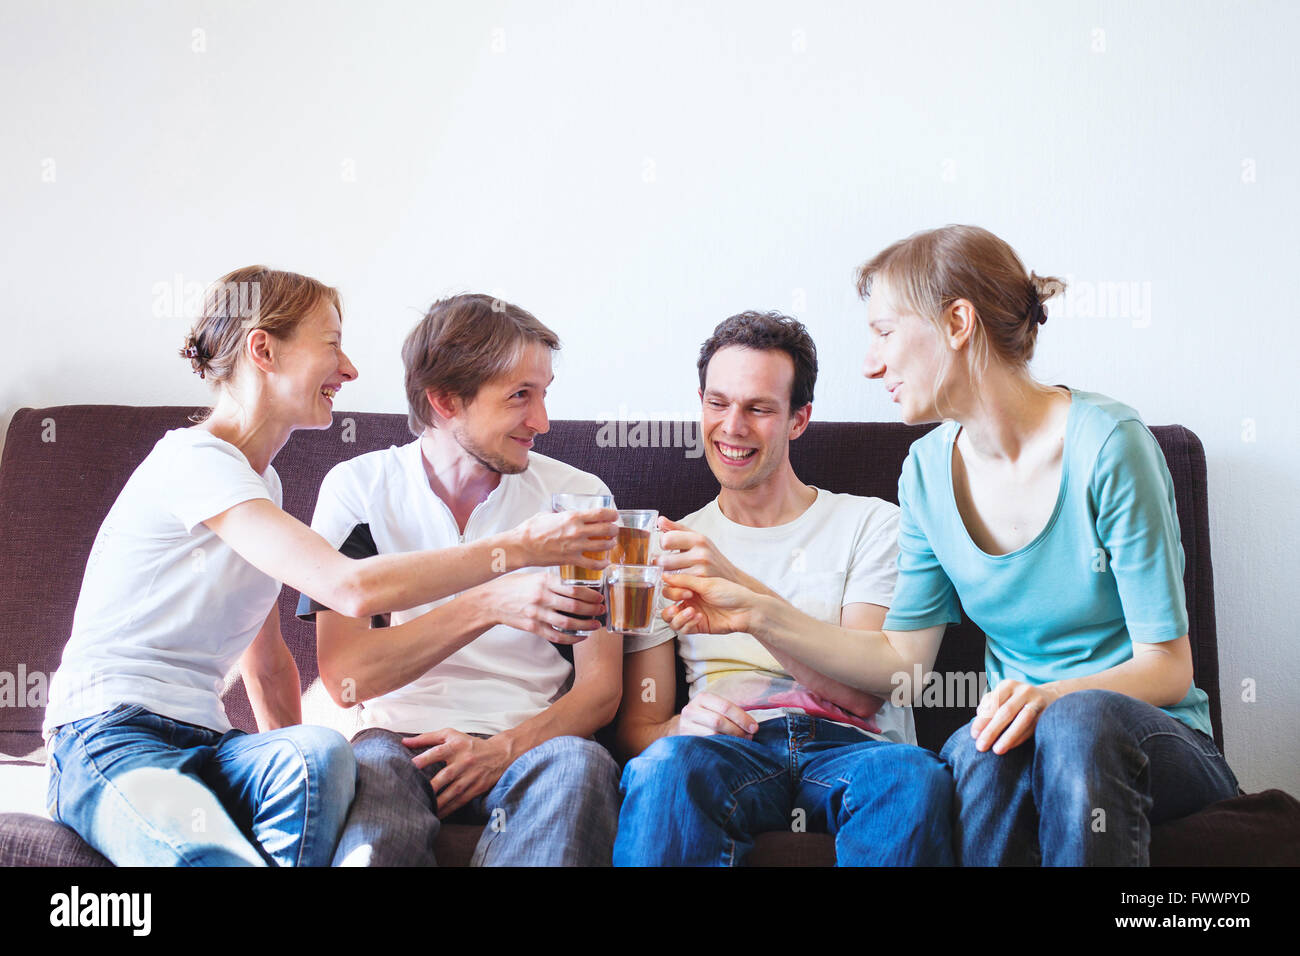 group of friends cheering at home, happy young smiling people with drinks, copyspace Stock Photo